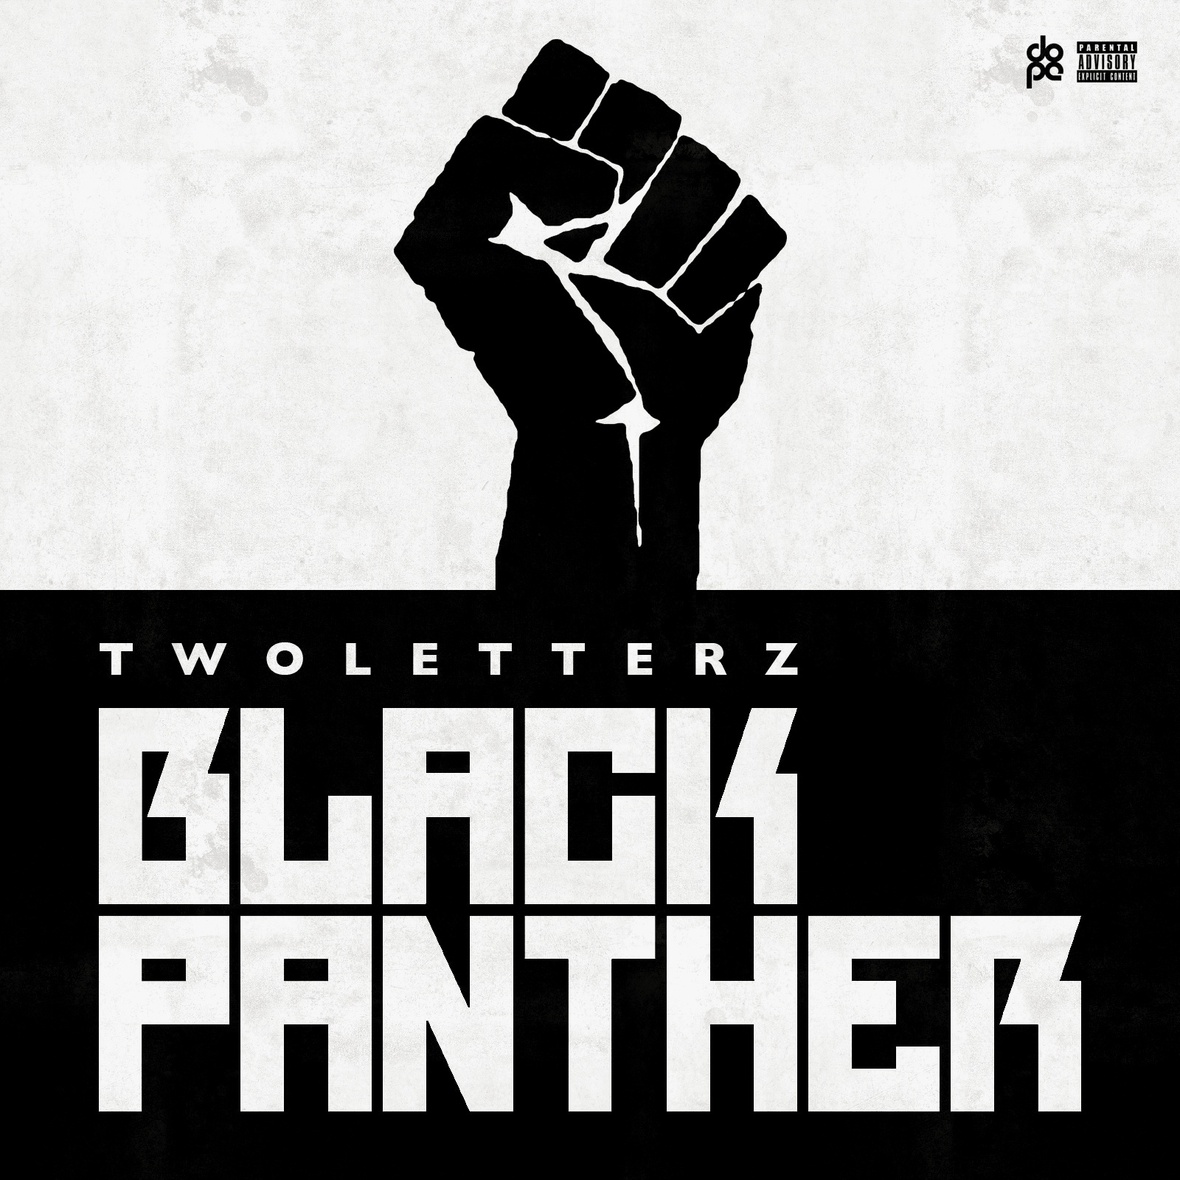 TwoLetterz: Black Panther